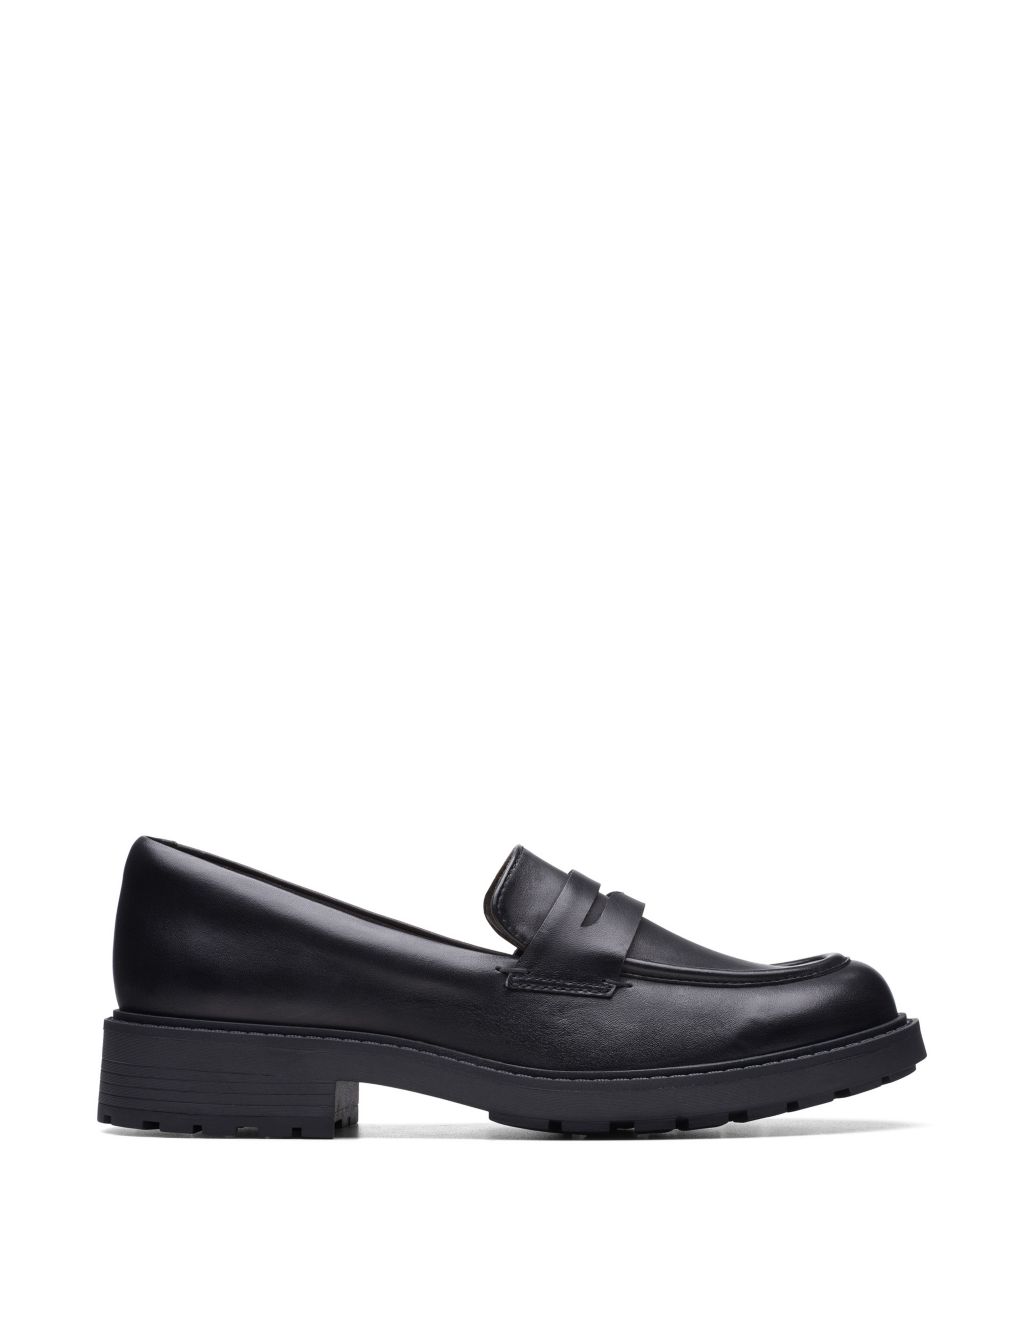 Leather Chunky Block Heel Loafers image 1